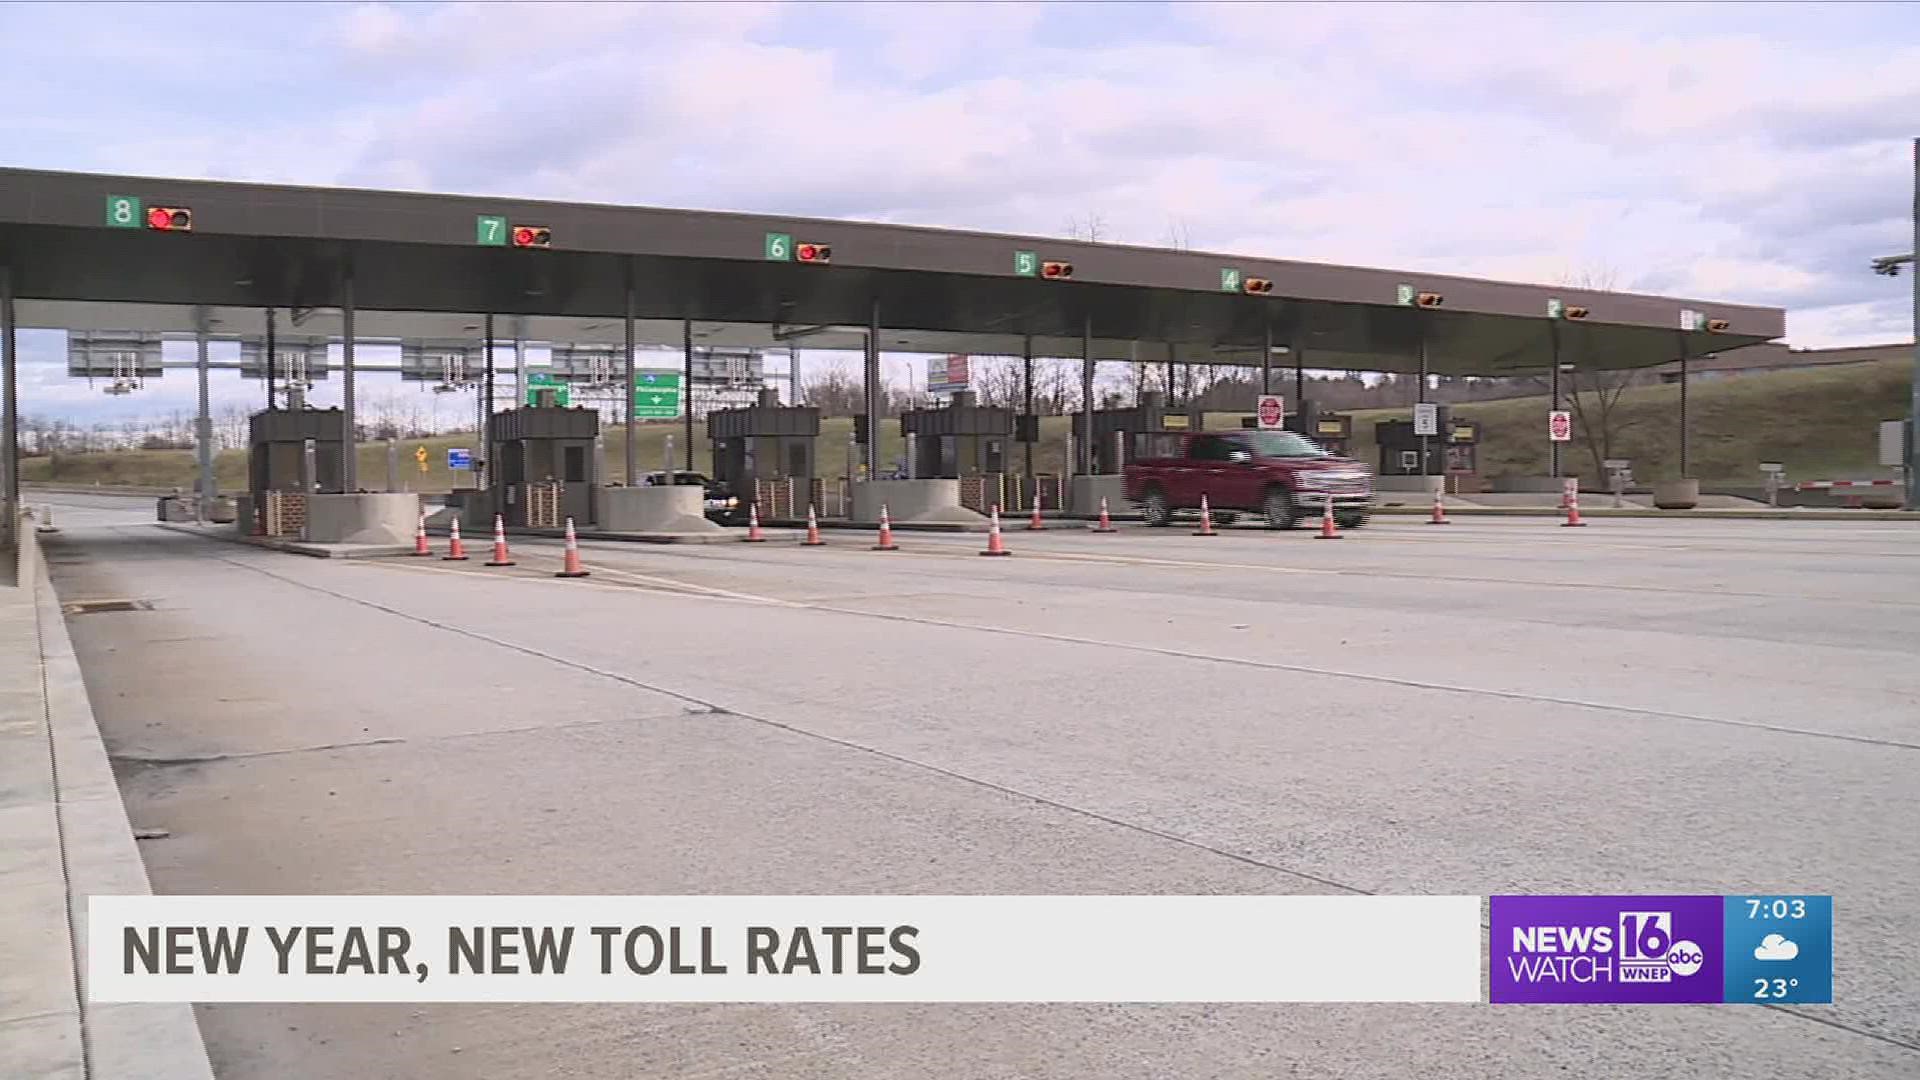 The new year will soon be here, and with it, higher tolls on the Pennsylvania Turnpike.